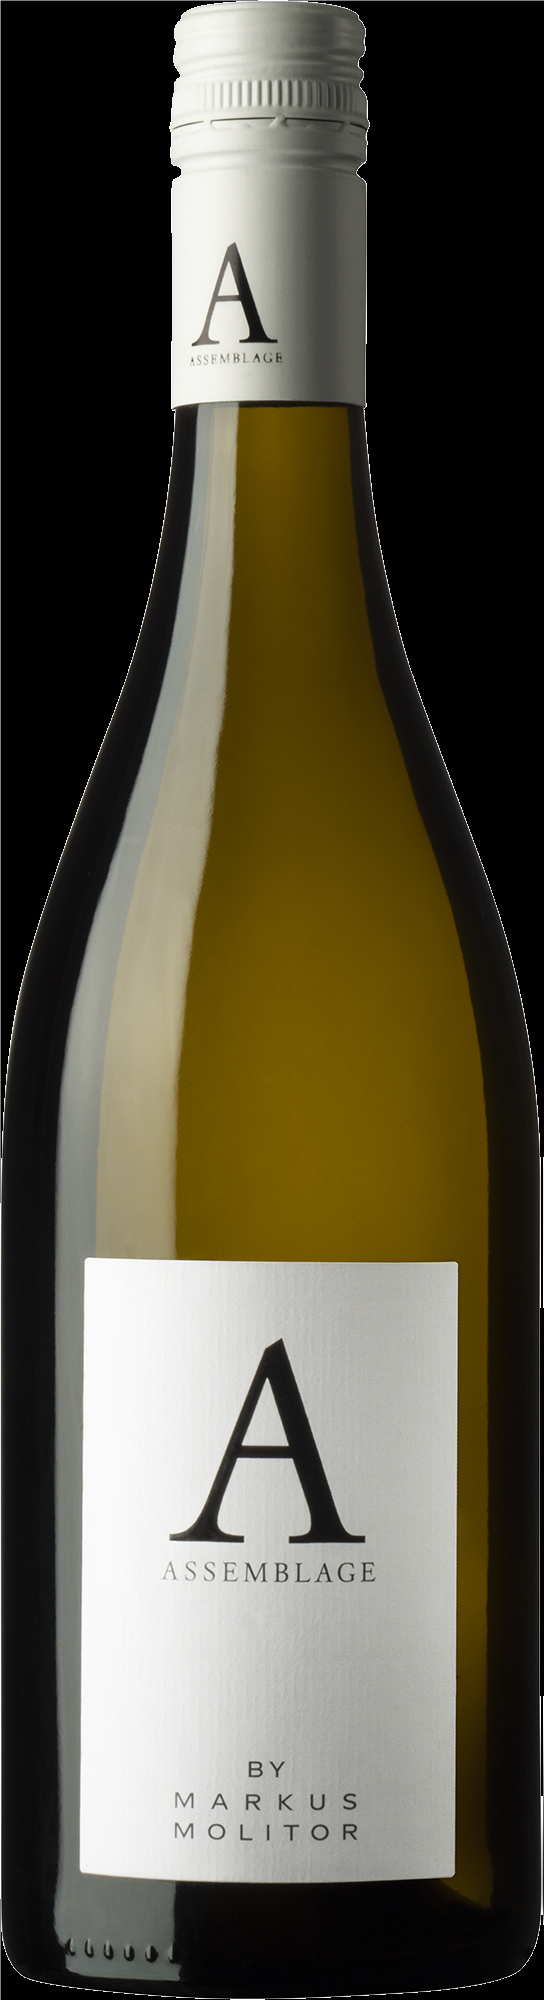 Assemblage Riesling by  Markus Molitor  Tyskland Mosel